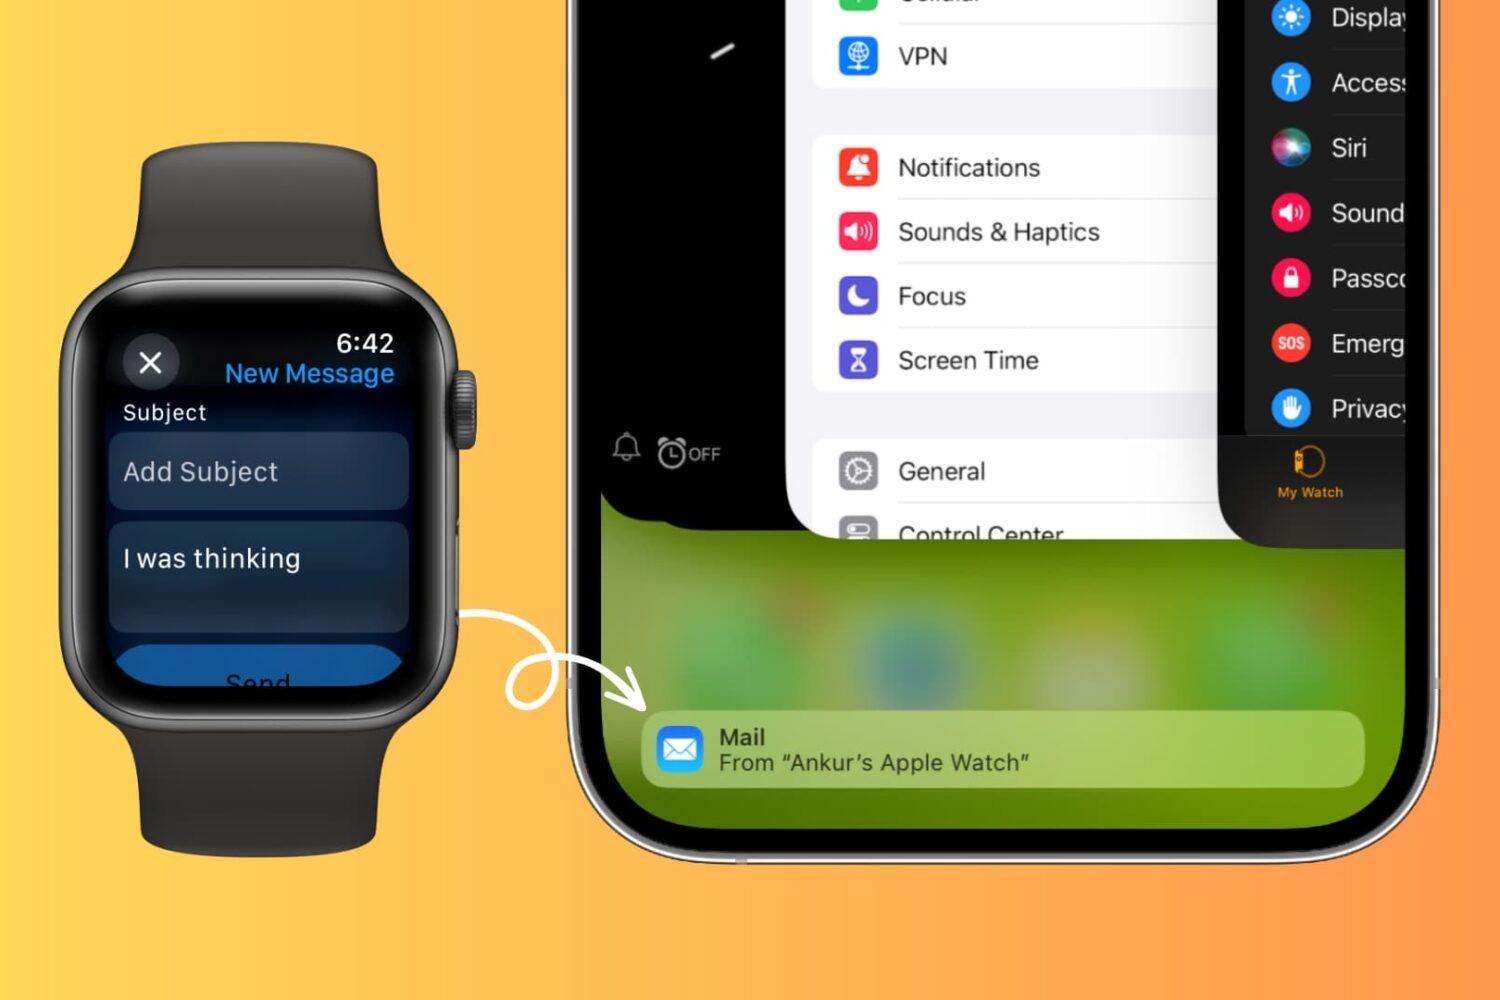 Handoff from Apple Watch to iPhone